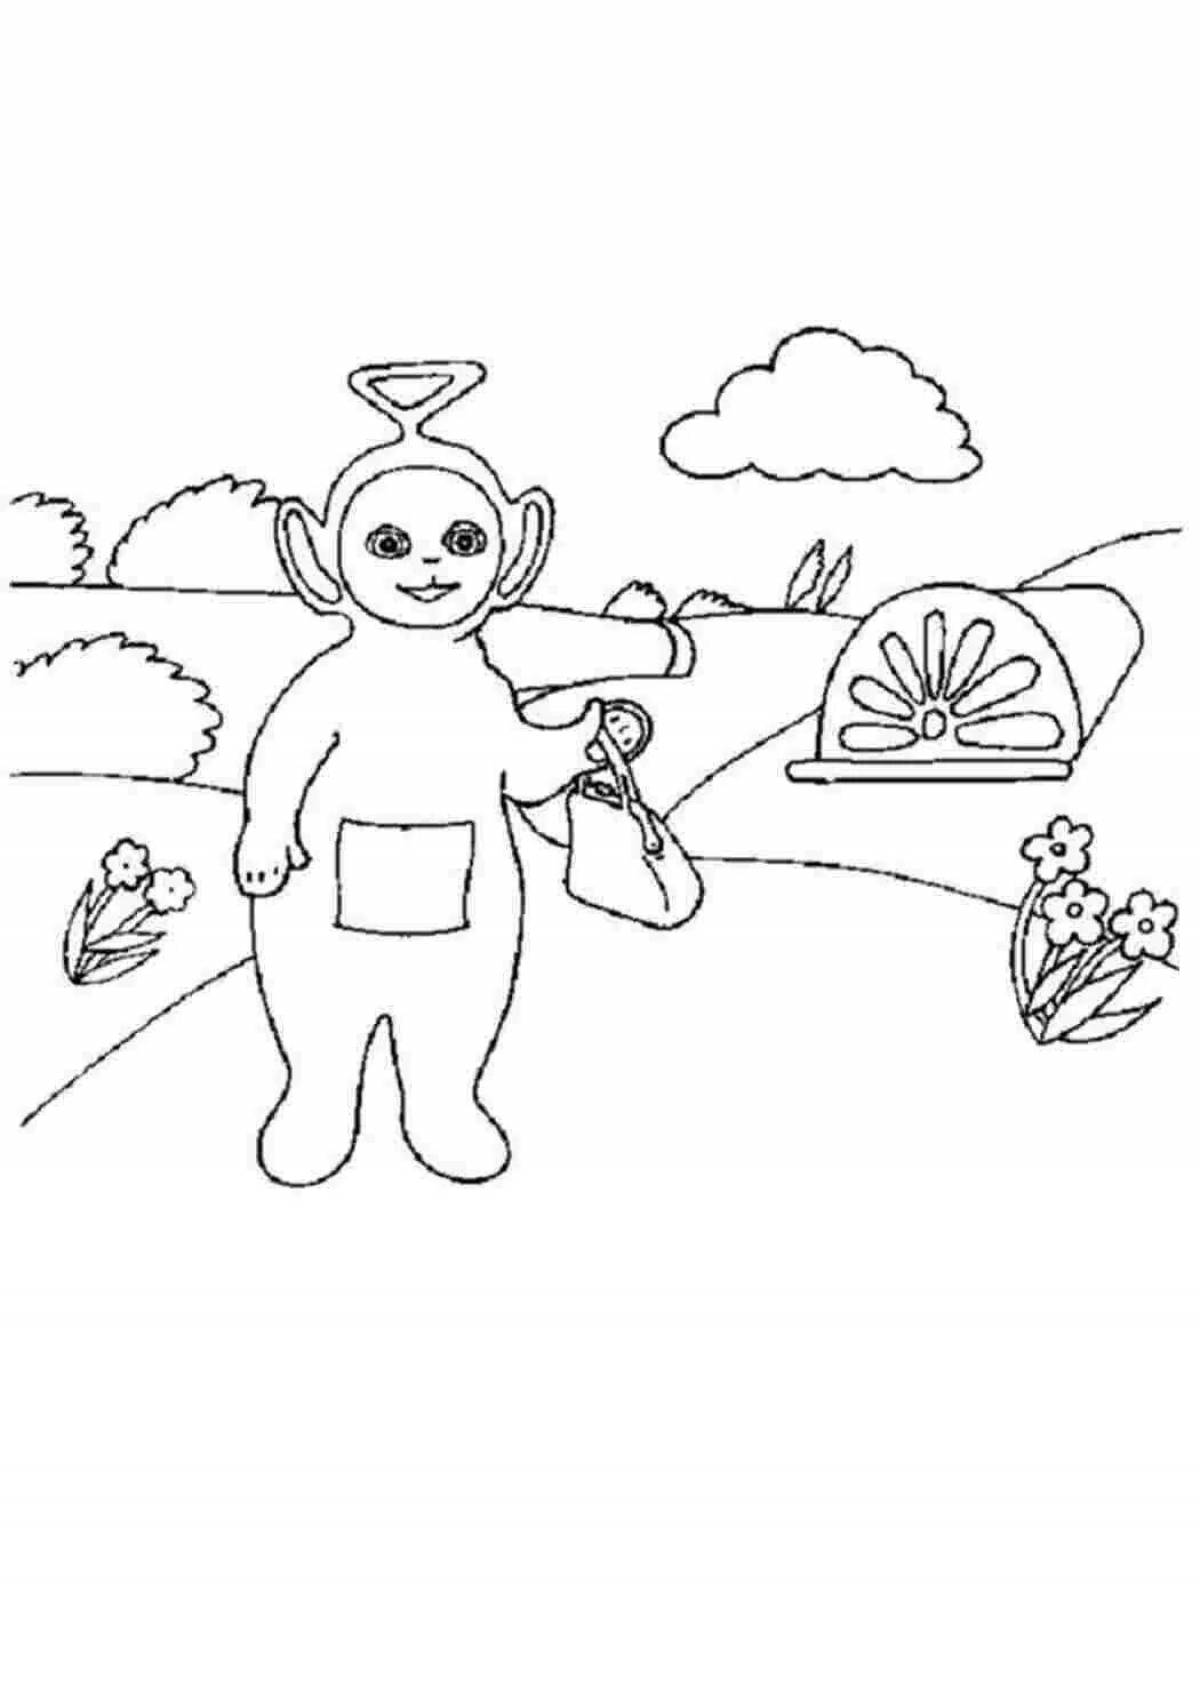 Gorgeous teletubbies coloring page